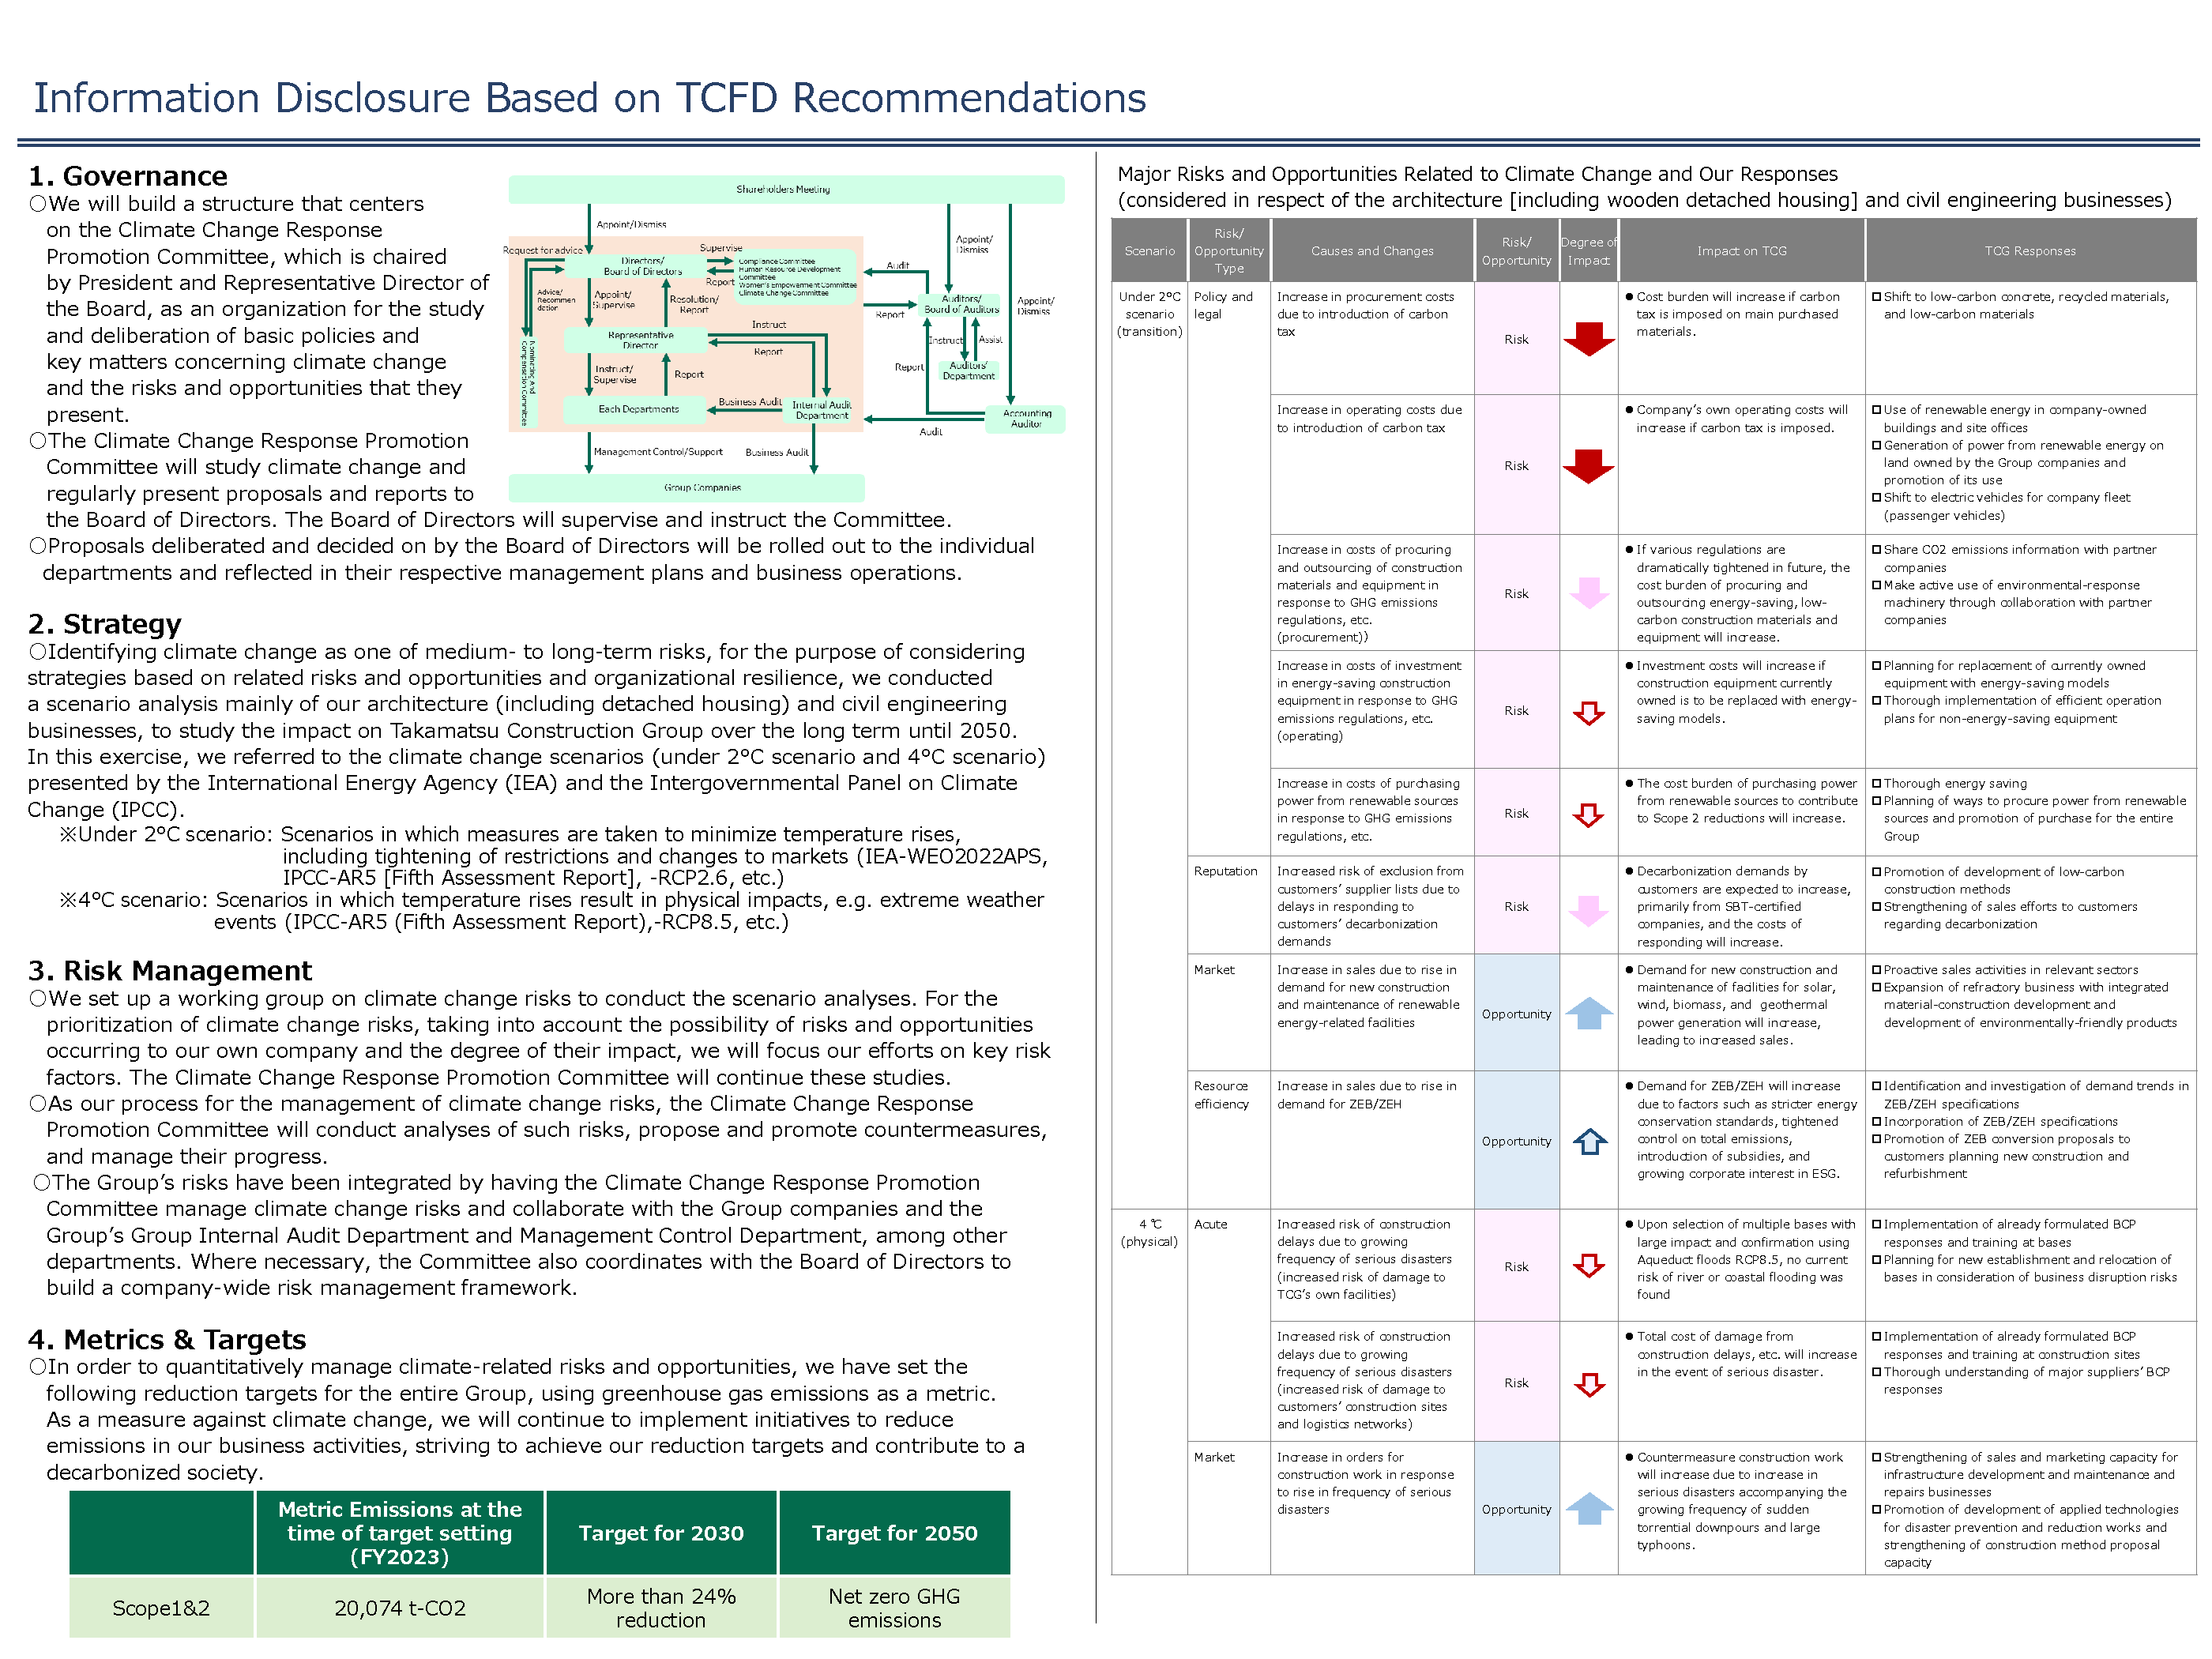 Information Disclosure in Line with the TCFD Recommendations